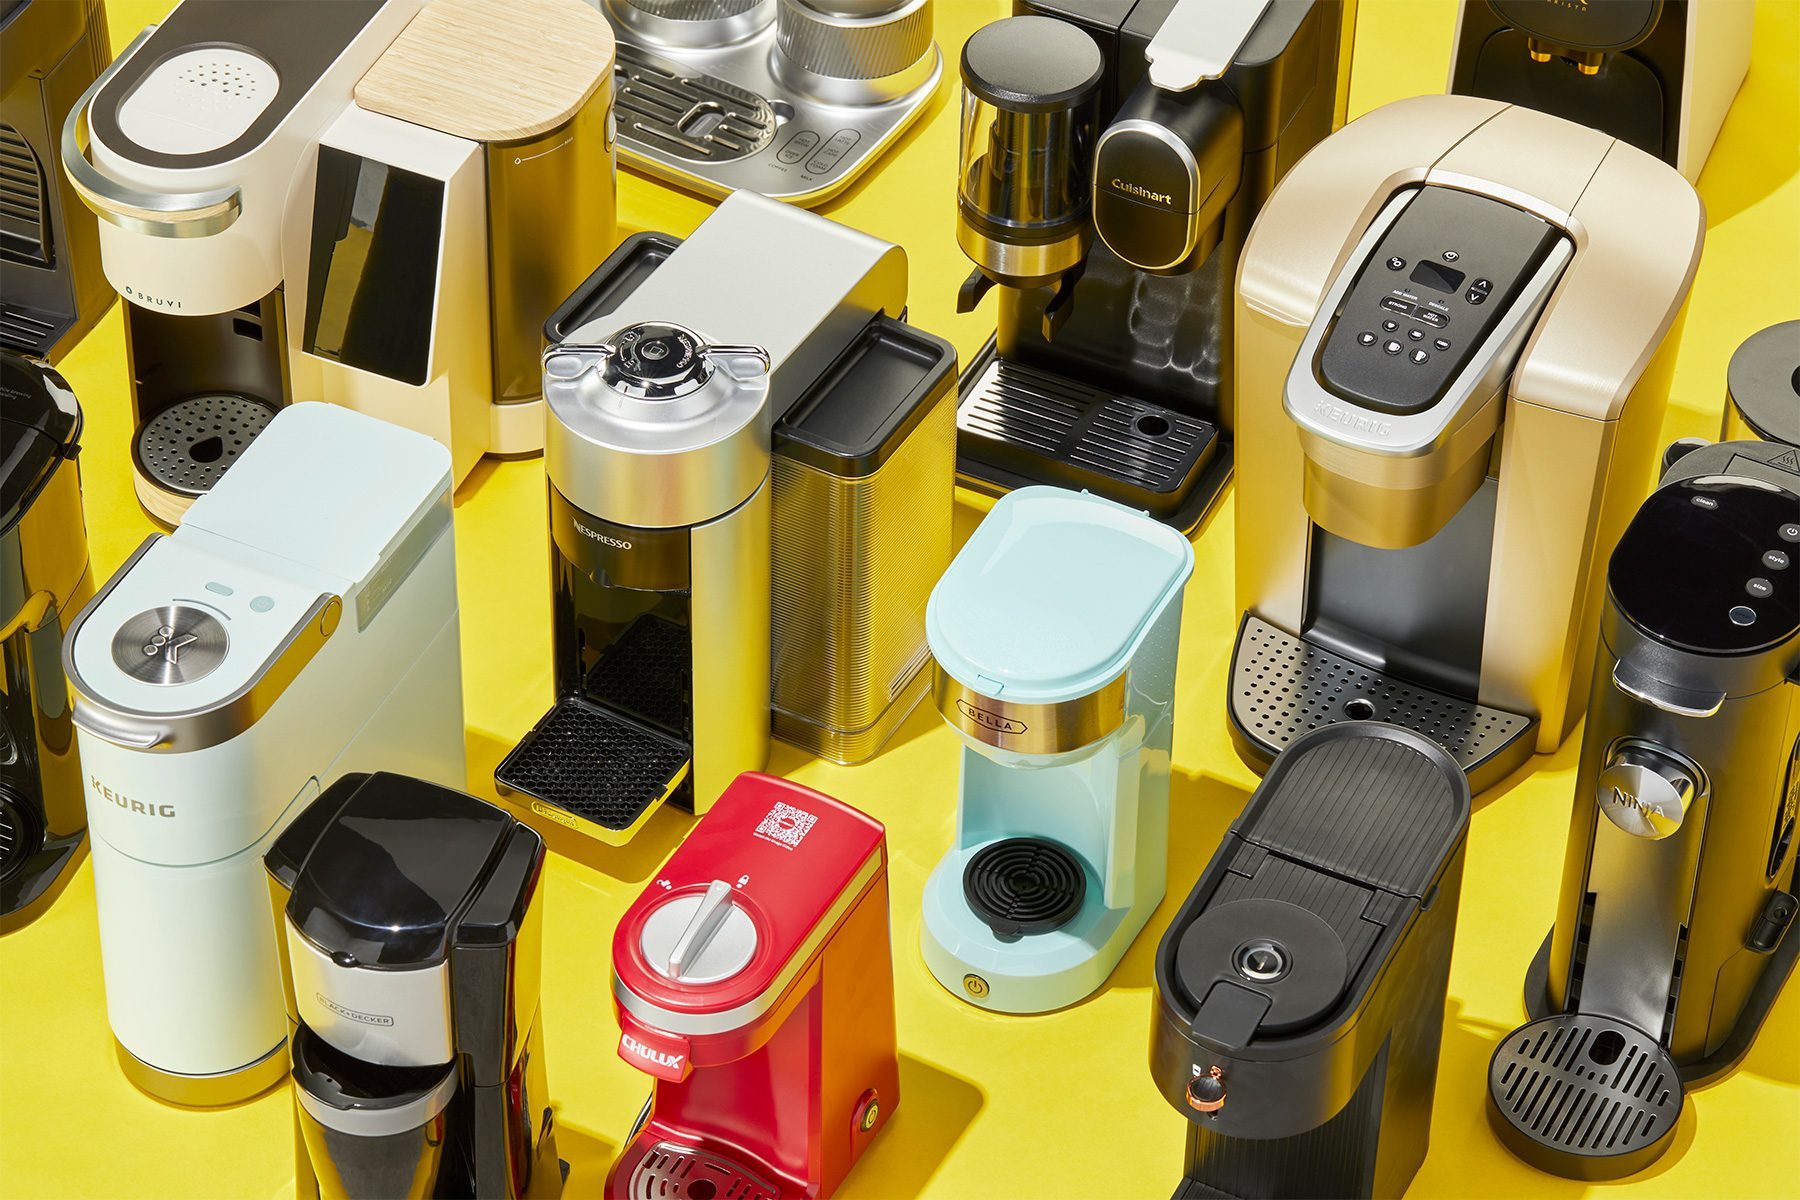 Group Shot of Multiple Coffee Makers Over Yellow Background